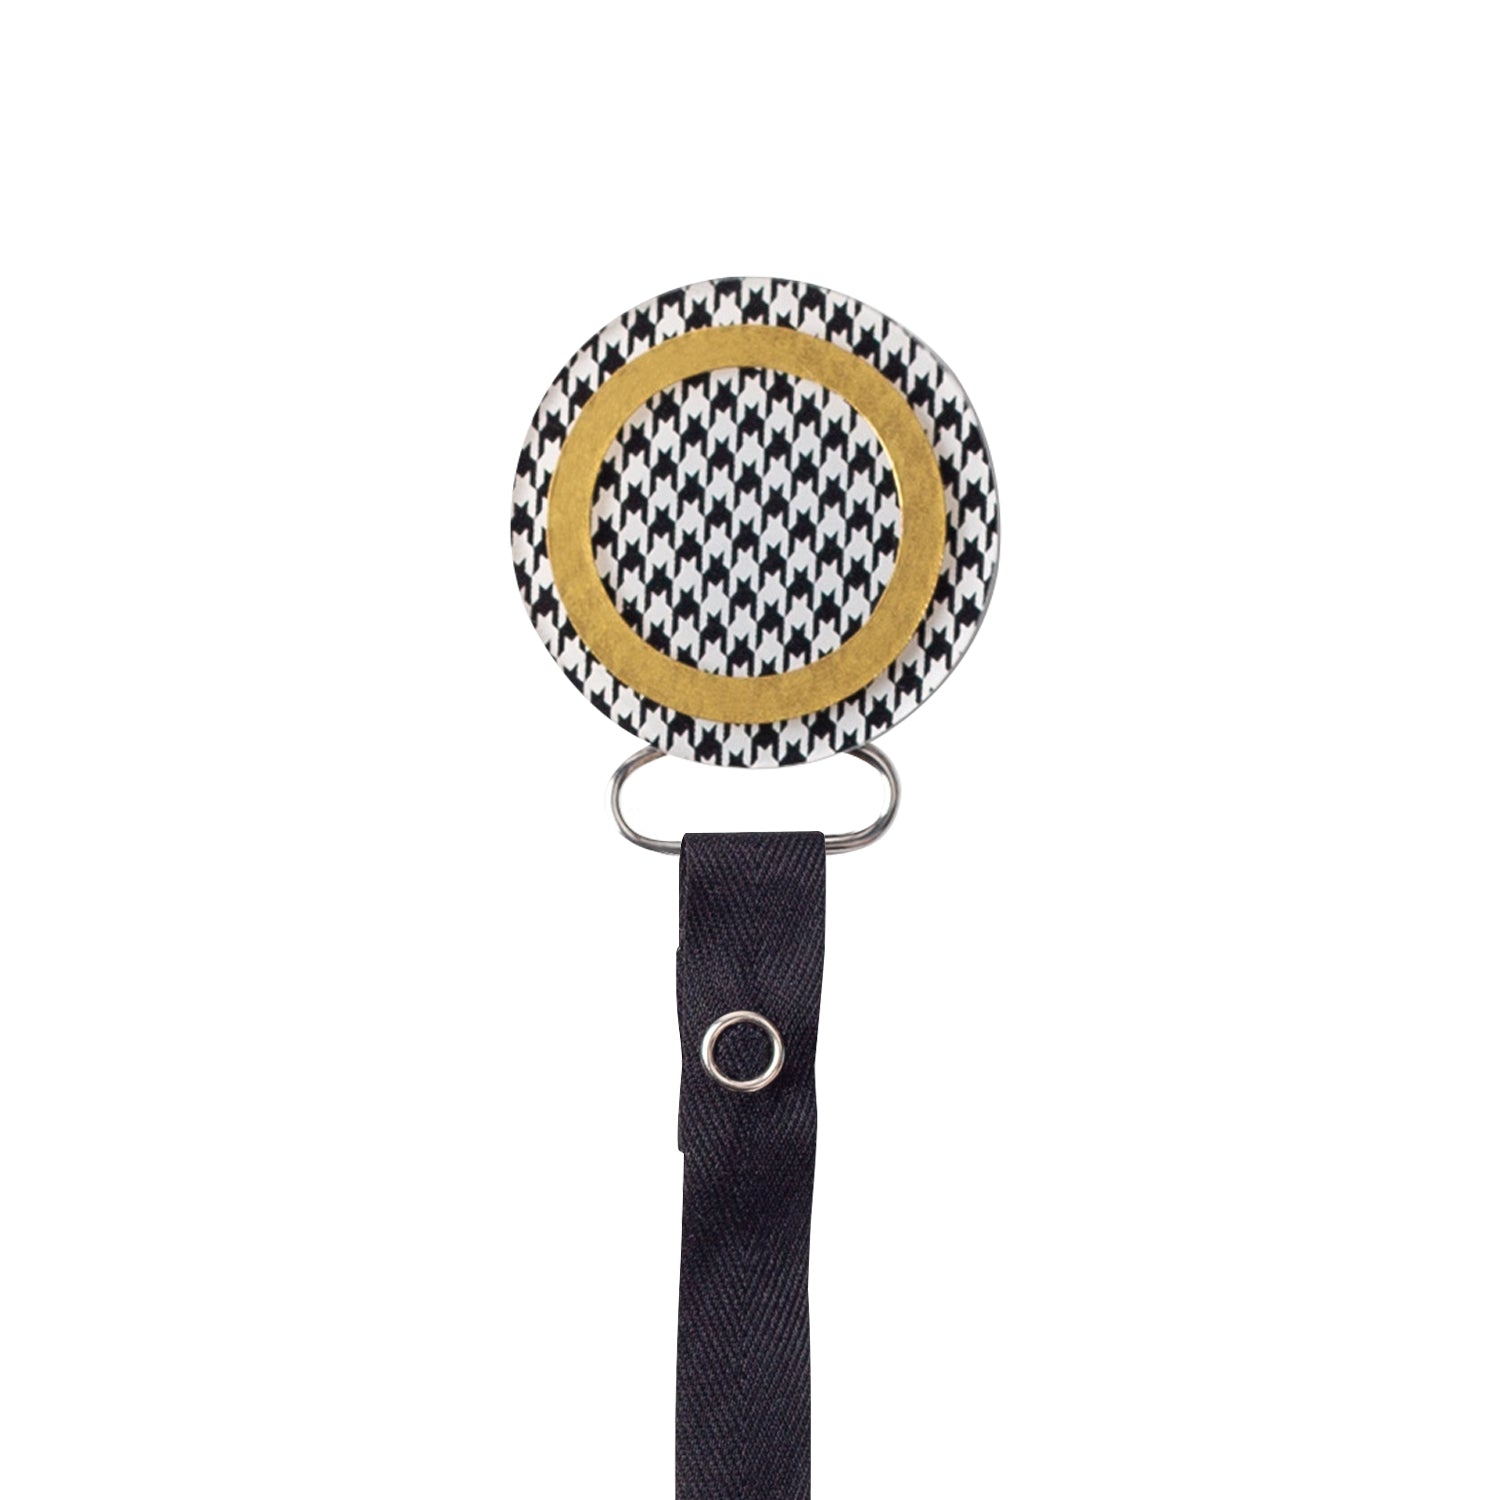 Classy Paci Houndstooth Black White Check Circle with Gold, white, grey, gold, baby boy girl pacifier clip